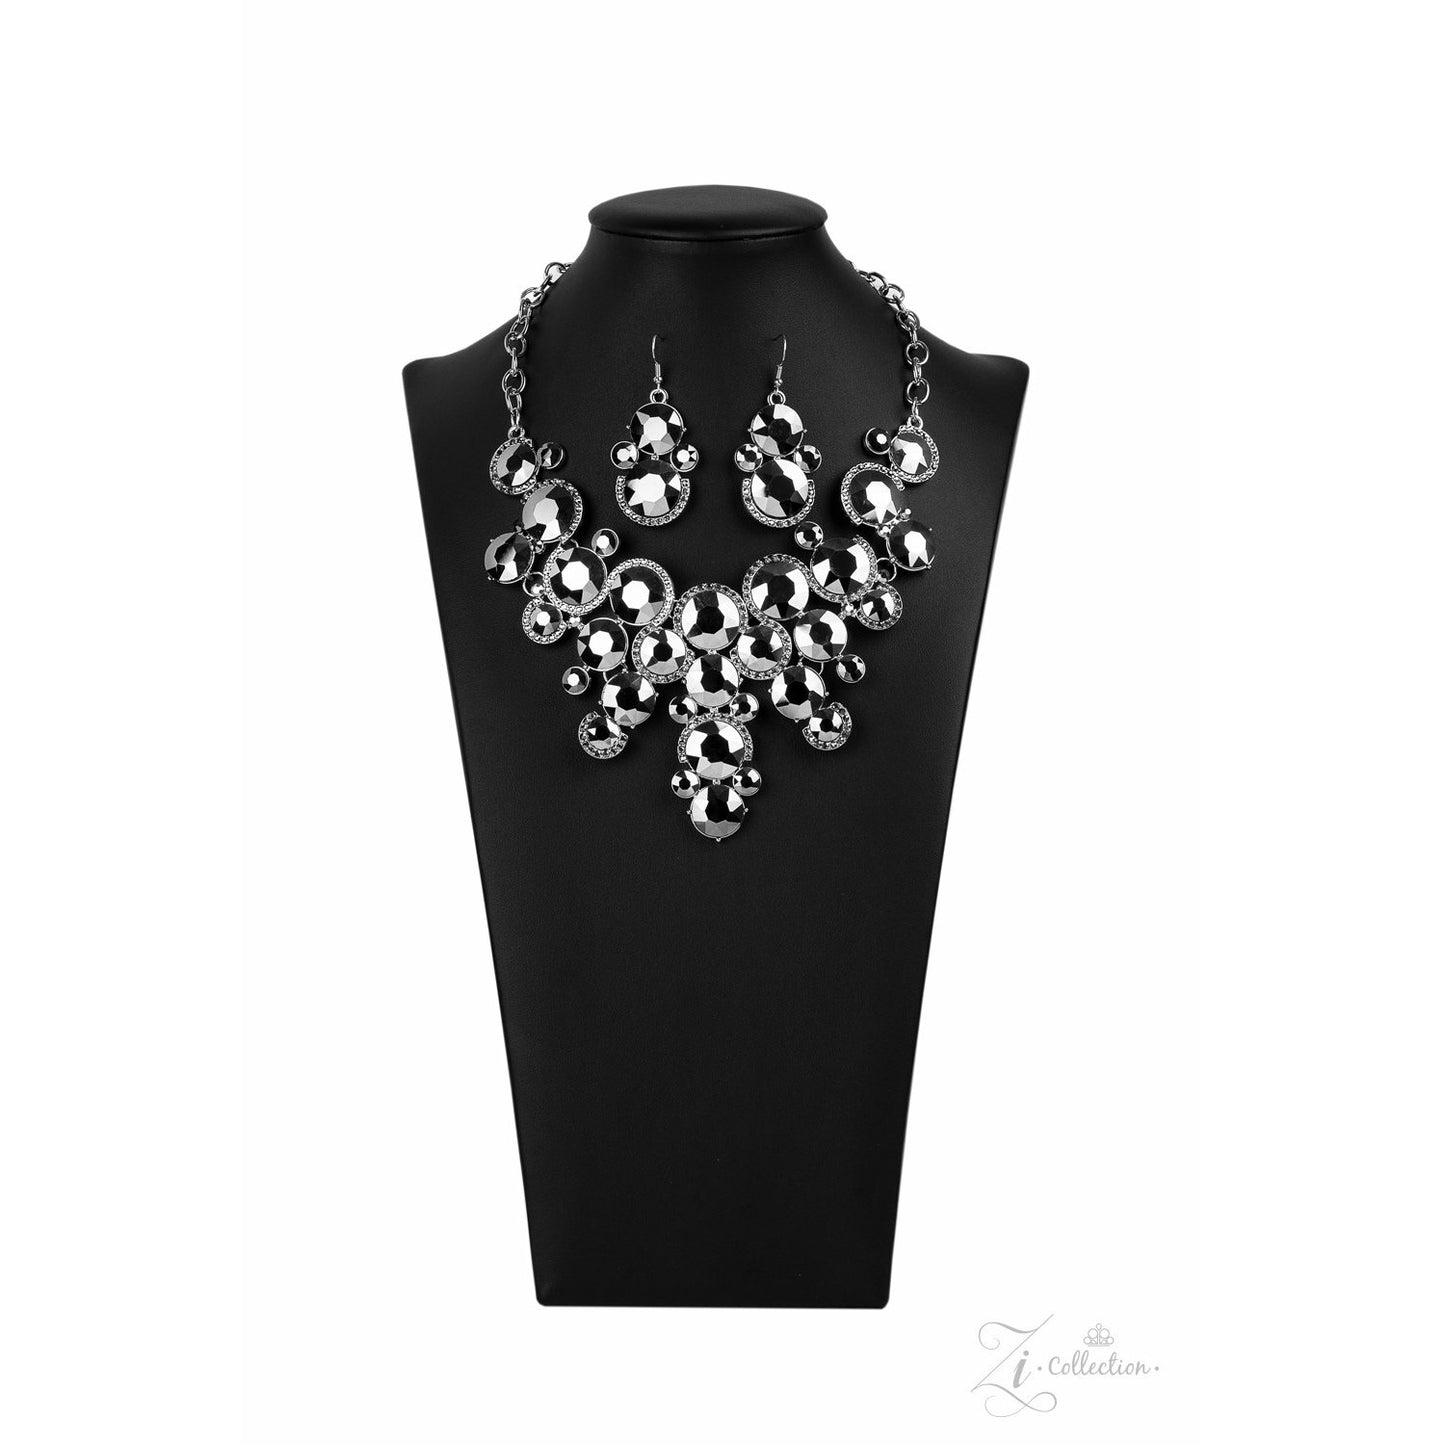 Fierce Zi collection necklace